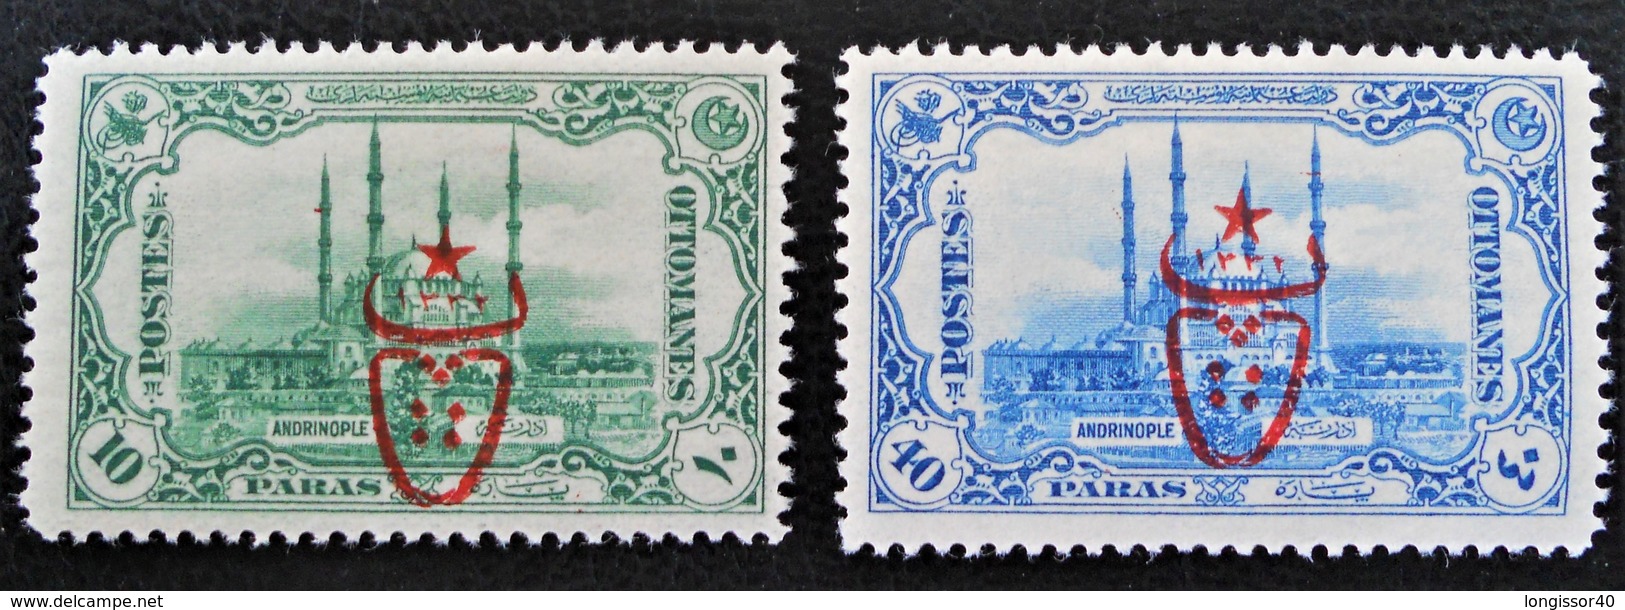 SURCHARGES 1917 - ANDRINOPLE 1916 - NEUFS * - YT 554/55 - TRES RAREMENT PROPOSES - Neufs